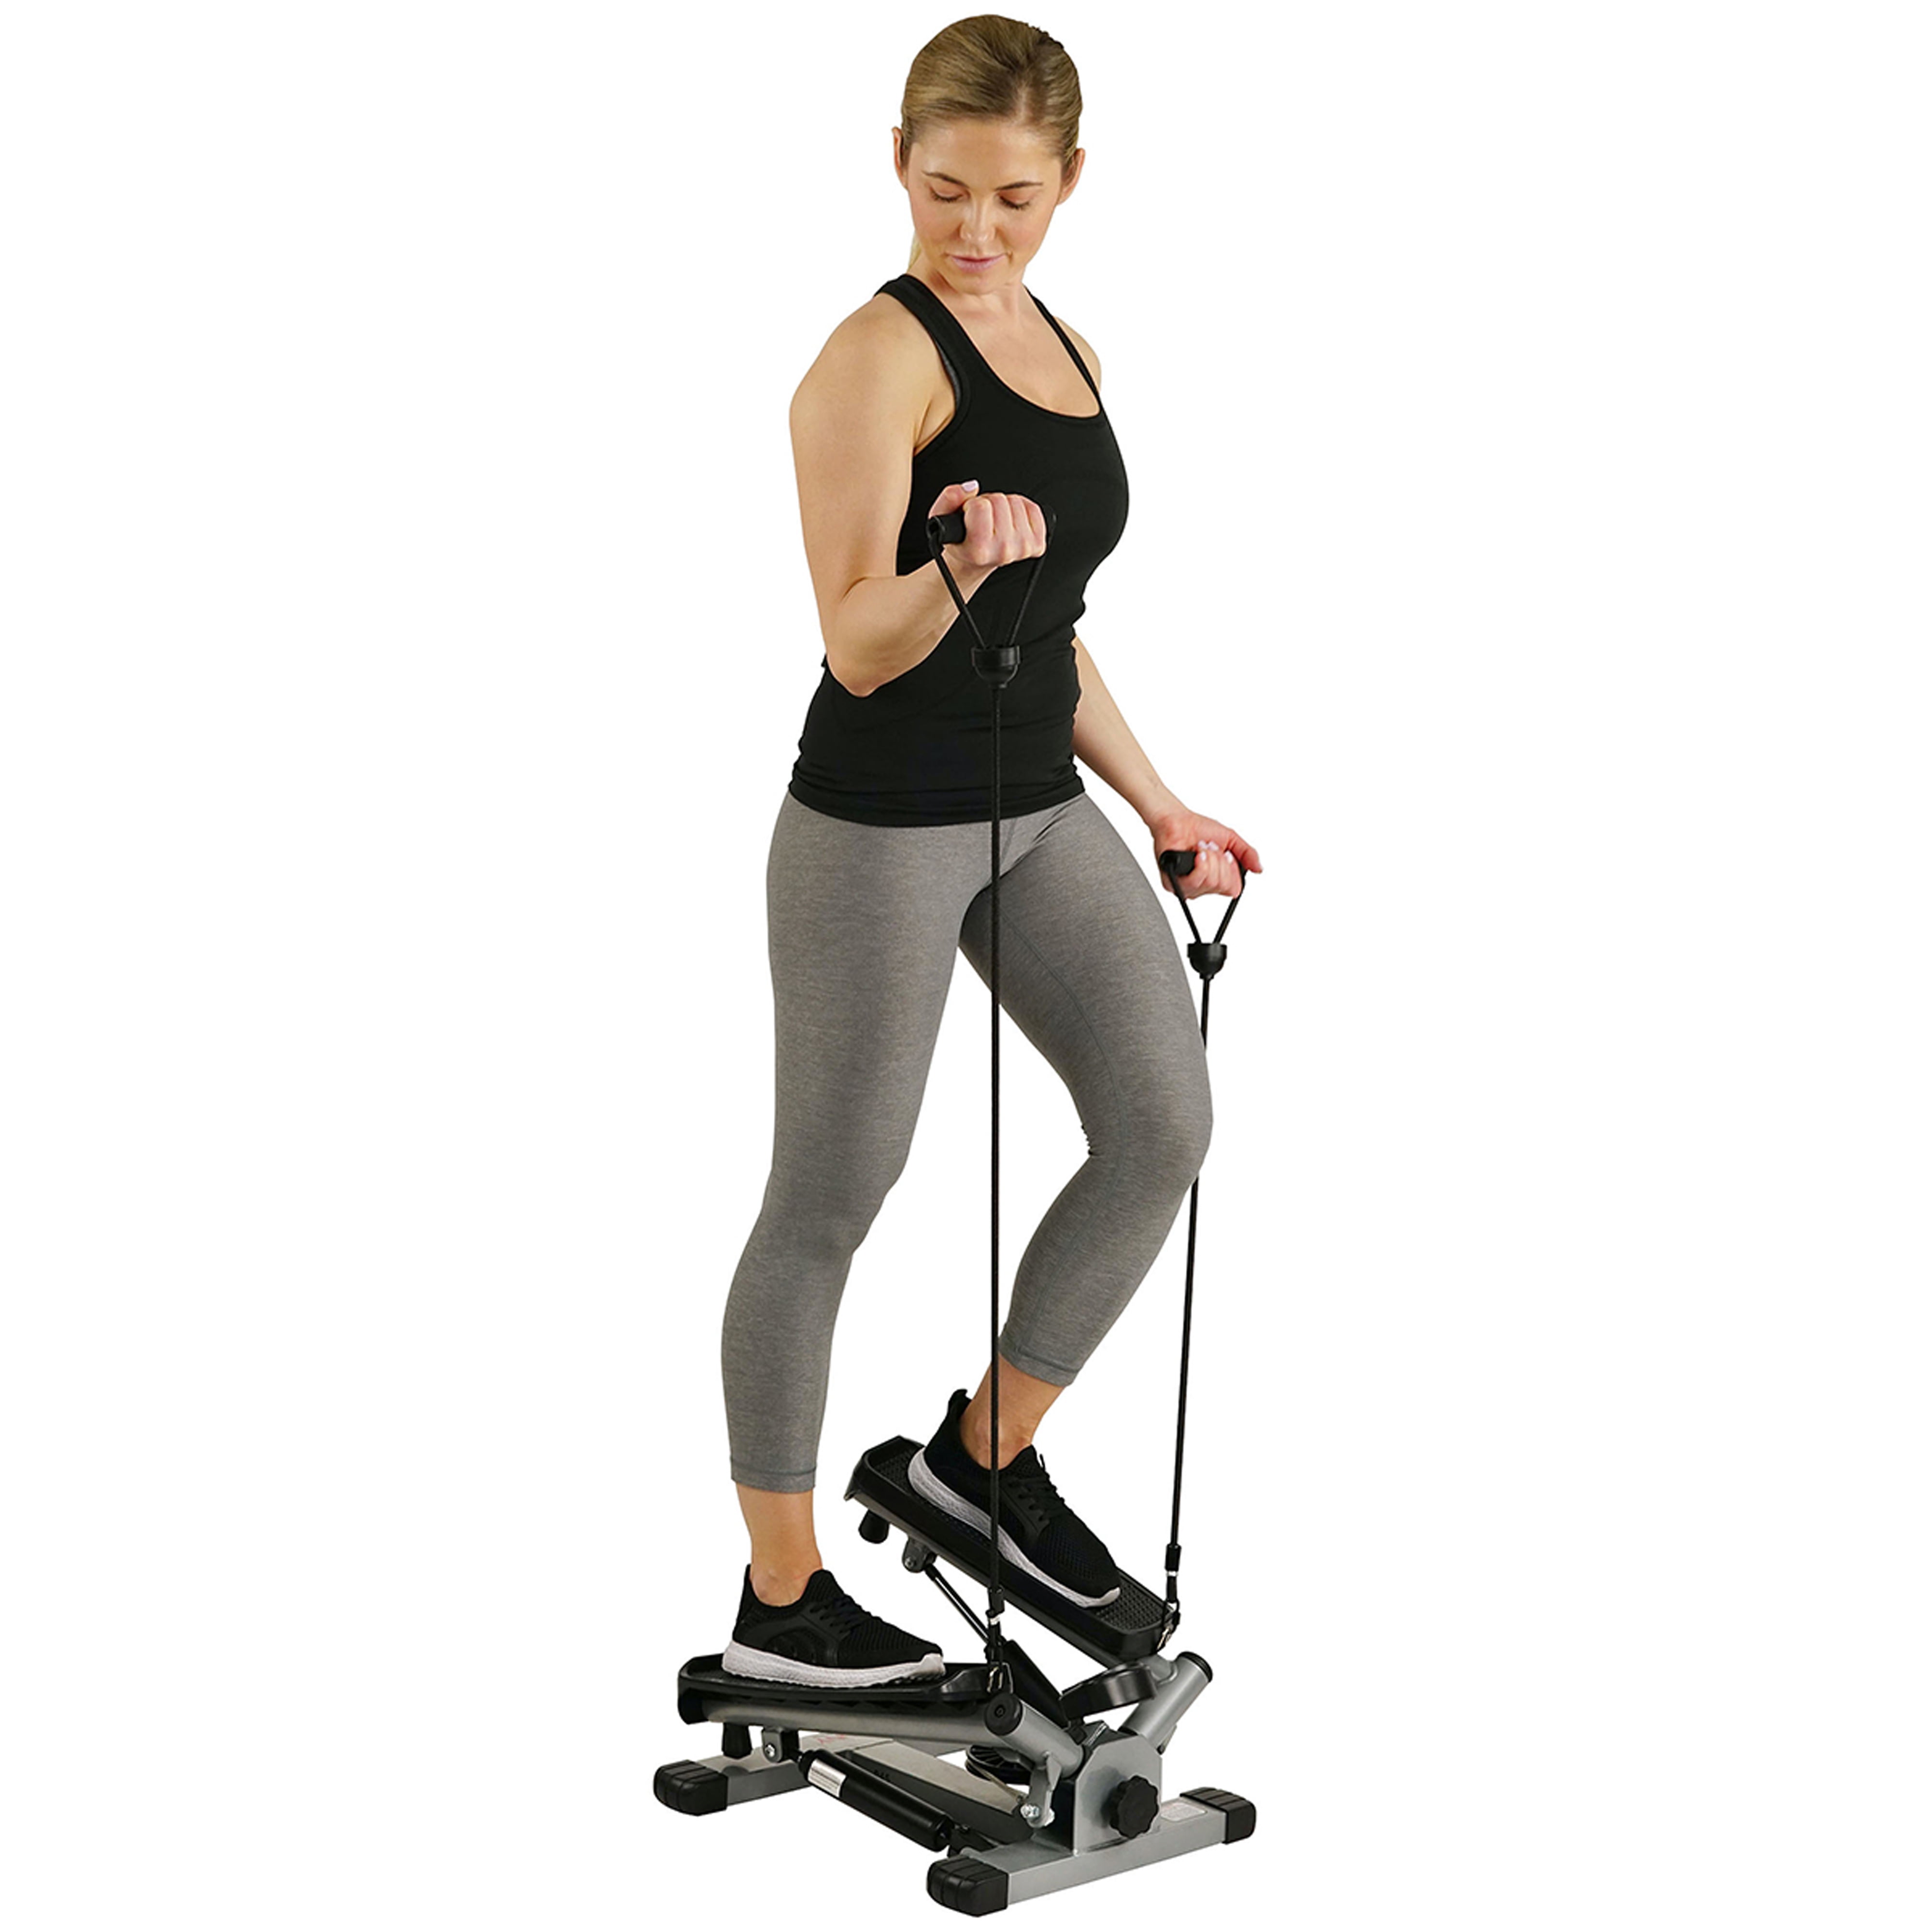 Shoppers Break a Sweat In Minutes Thanks to This Mini Stair-Stepper